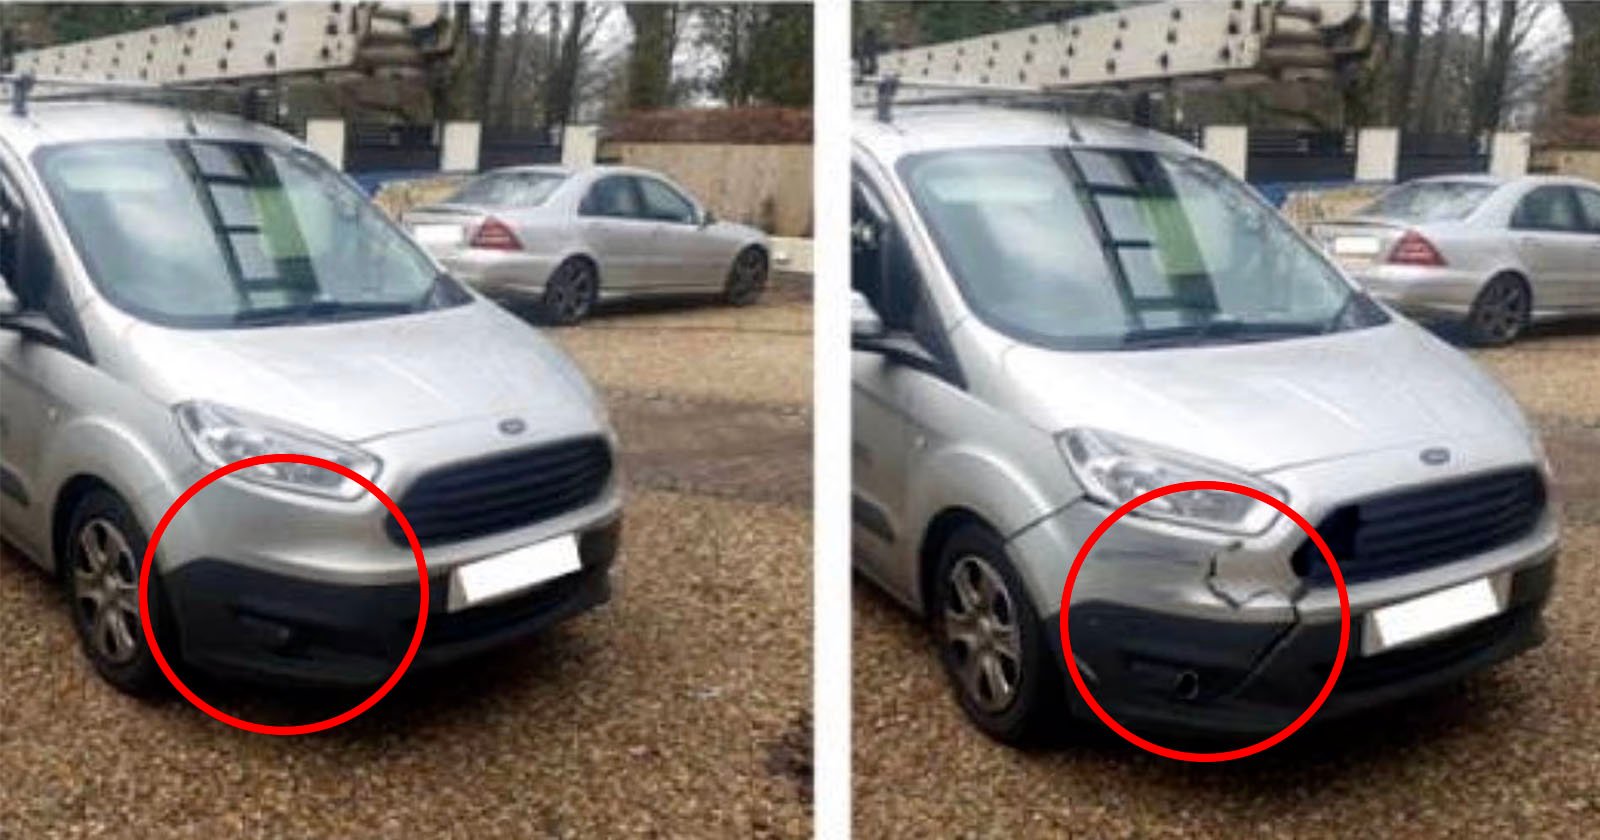 Fraudsters Are Editing Photos of Damaged Vehicles to Claim Insurance